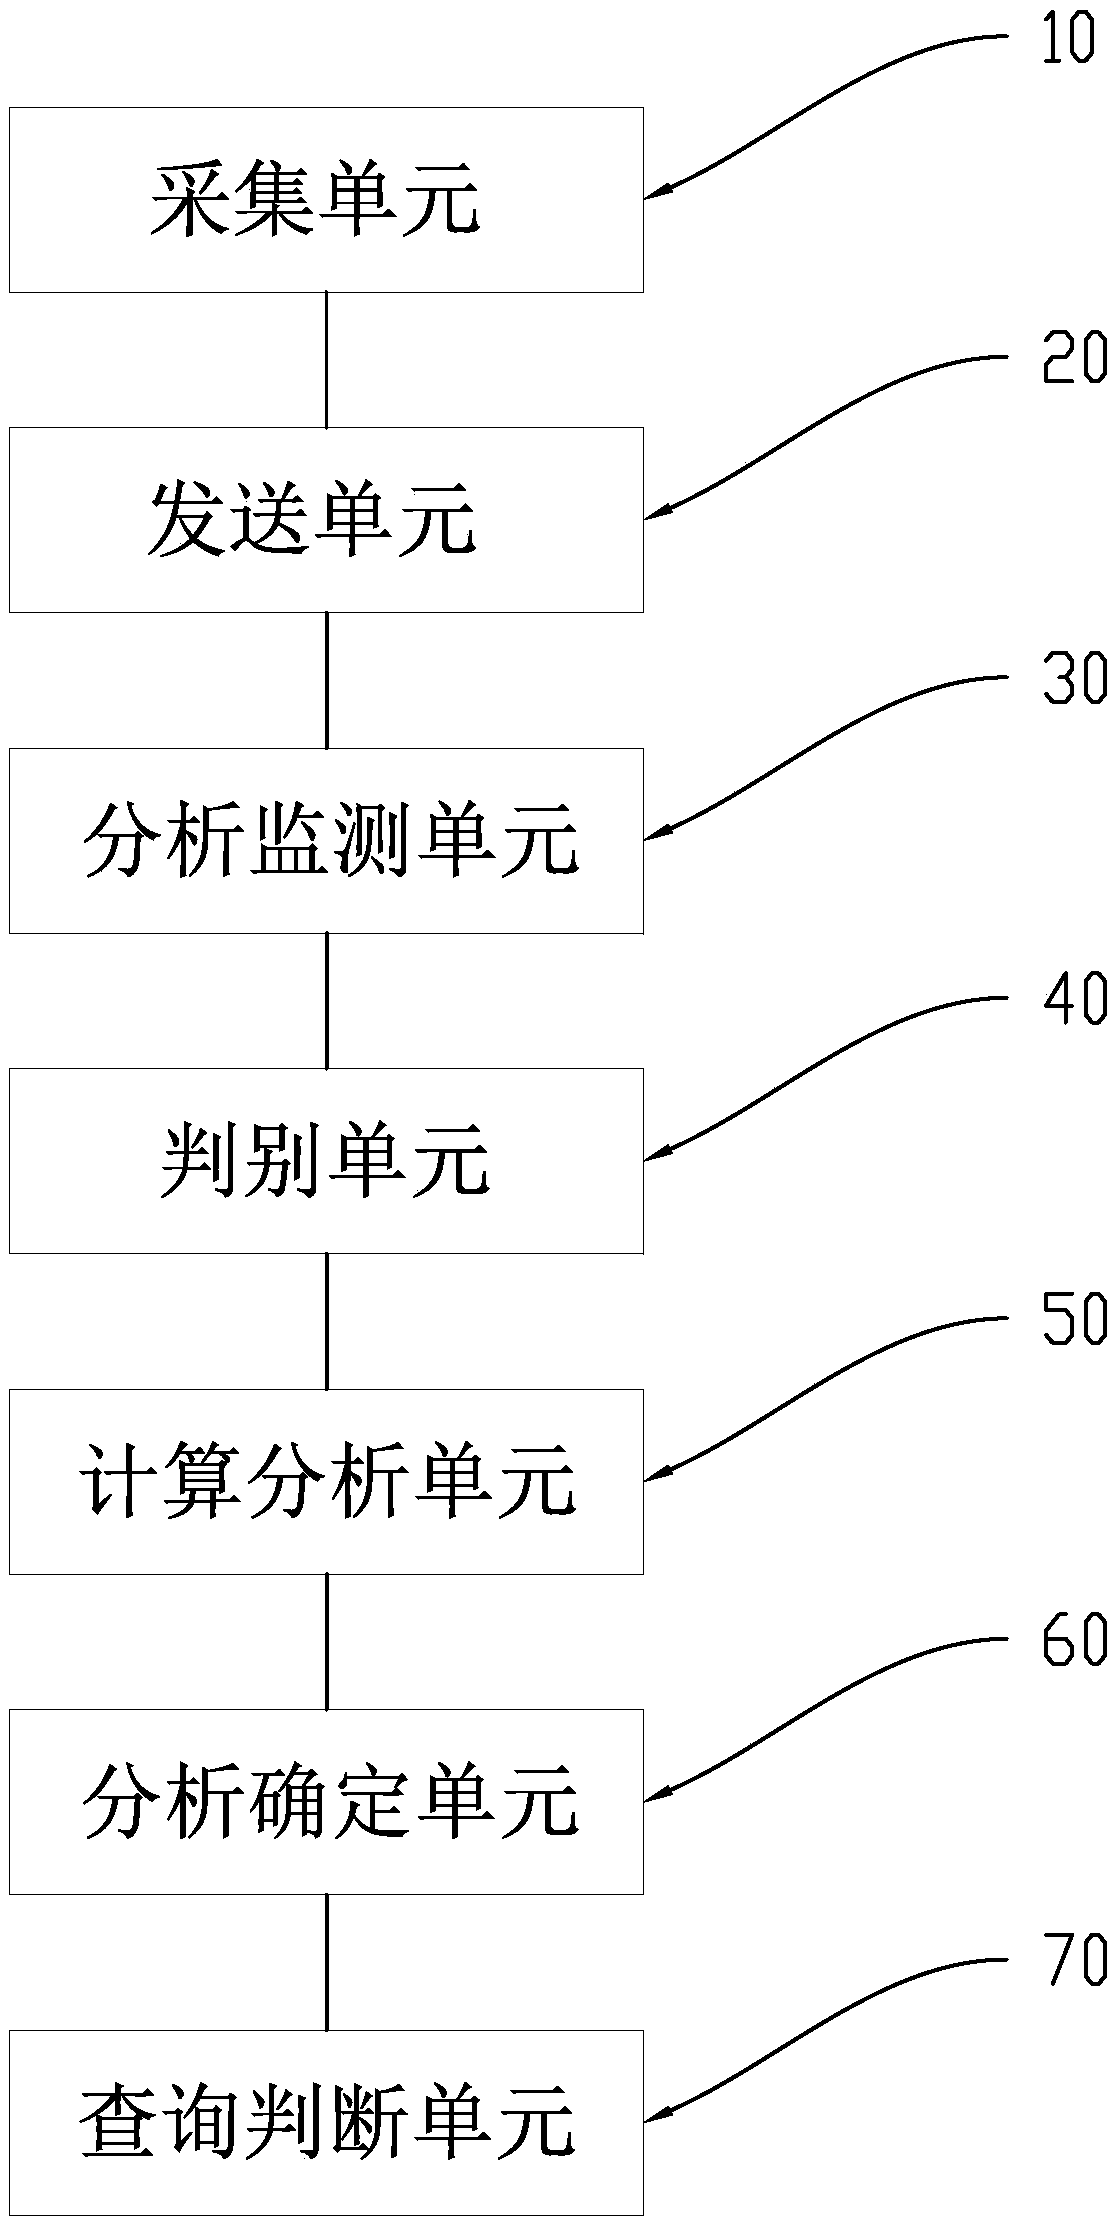 Non-intrusive user power consumption fault identification method and system thereof